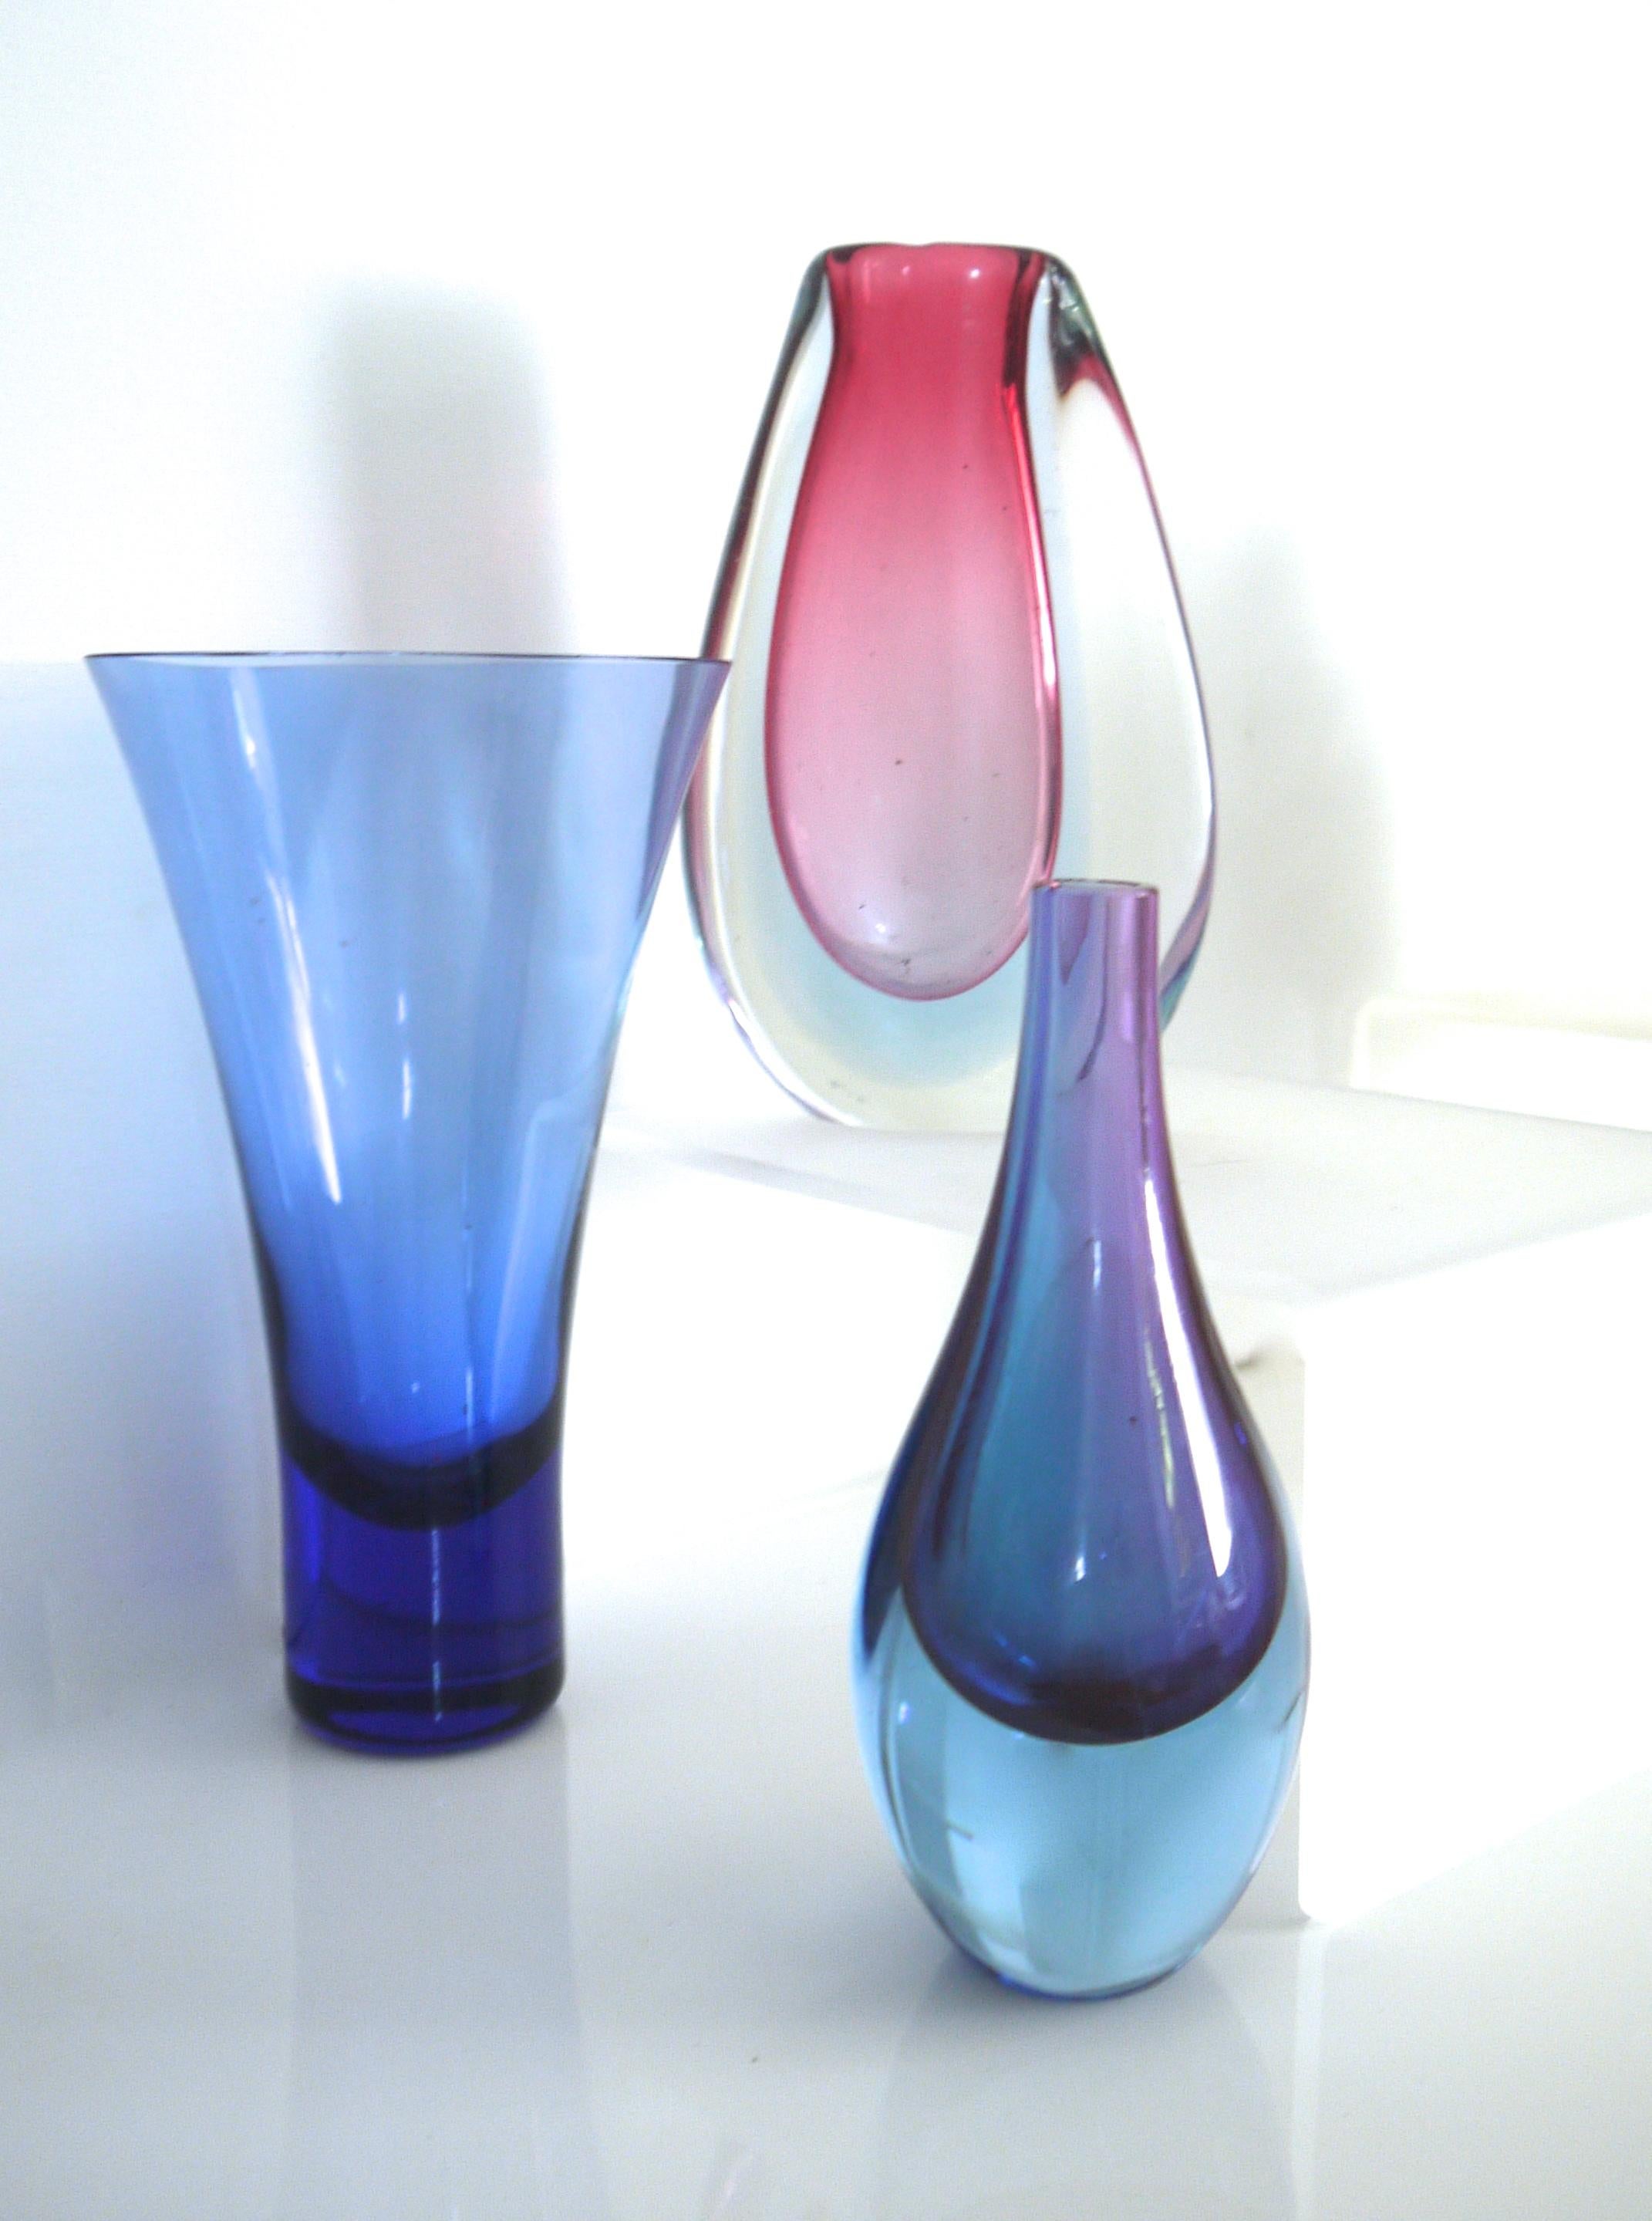 Italian Murano Sommerso Teardrop Vintage Art Glass Vase Late 1960s-1970s Blues and Pinks For Sale